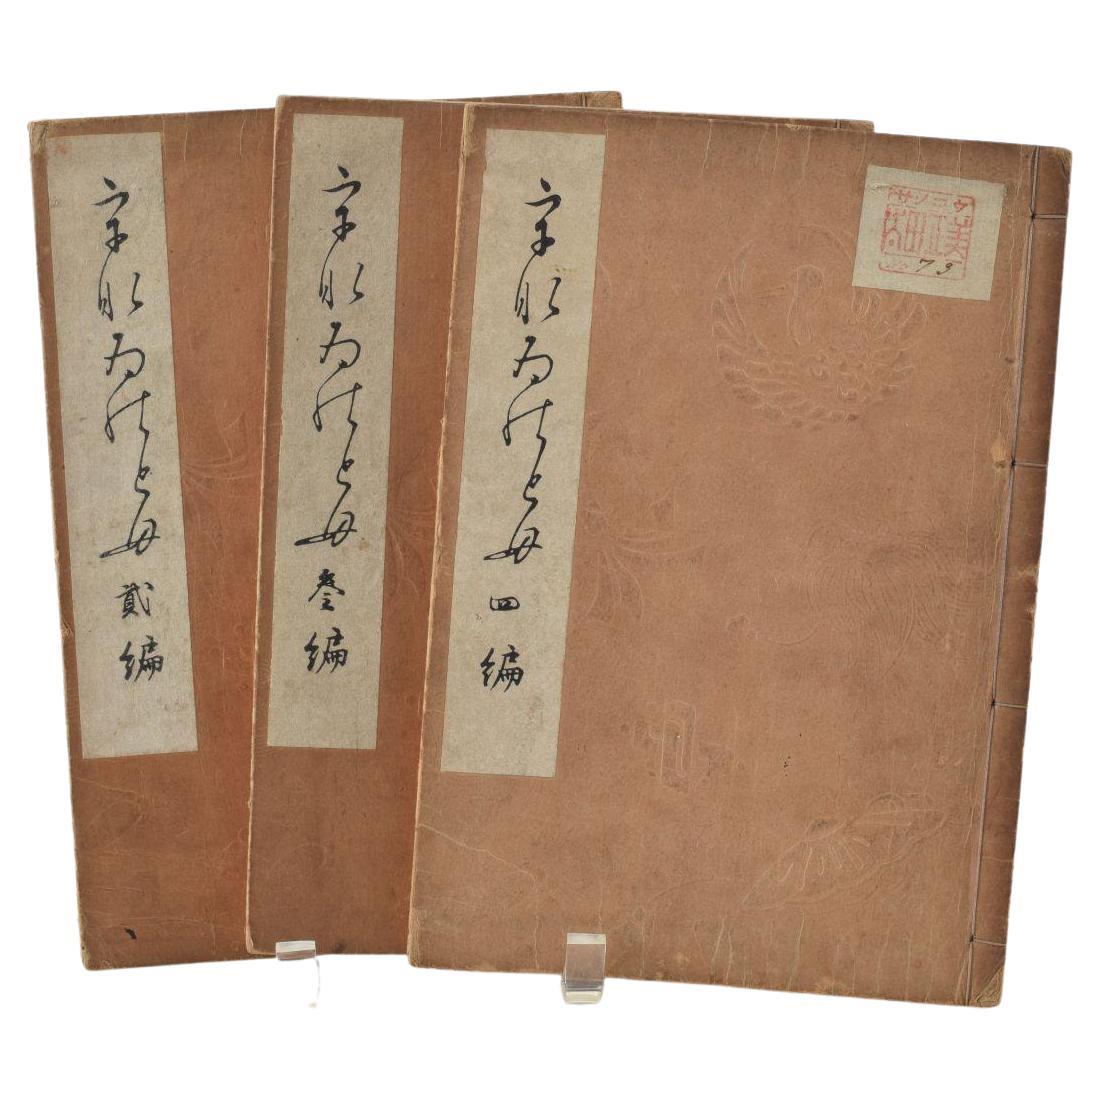 "Unai No Tomo" Early 20th C. Japanese Illustrated Toy Books, Volumes #2, #3, #4 For Sale